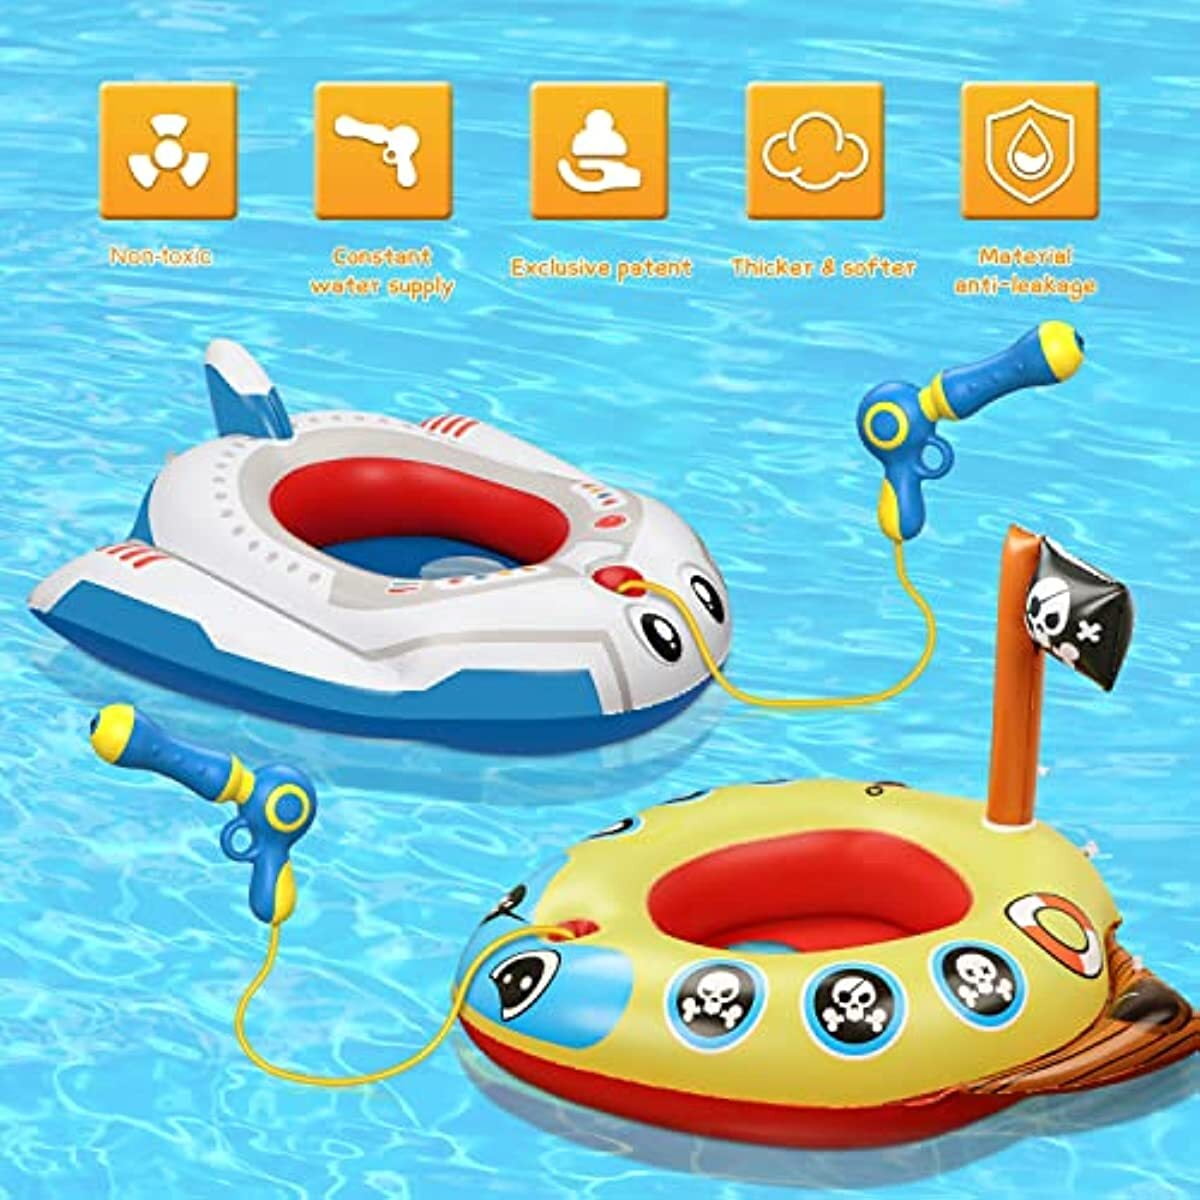 nflatable Kids Pool Float with Water Gun,Pirate Boat&Airplane Swimming Pool Toys for 3-8 Year Old Boys Girls(2Packs)